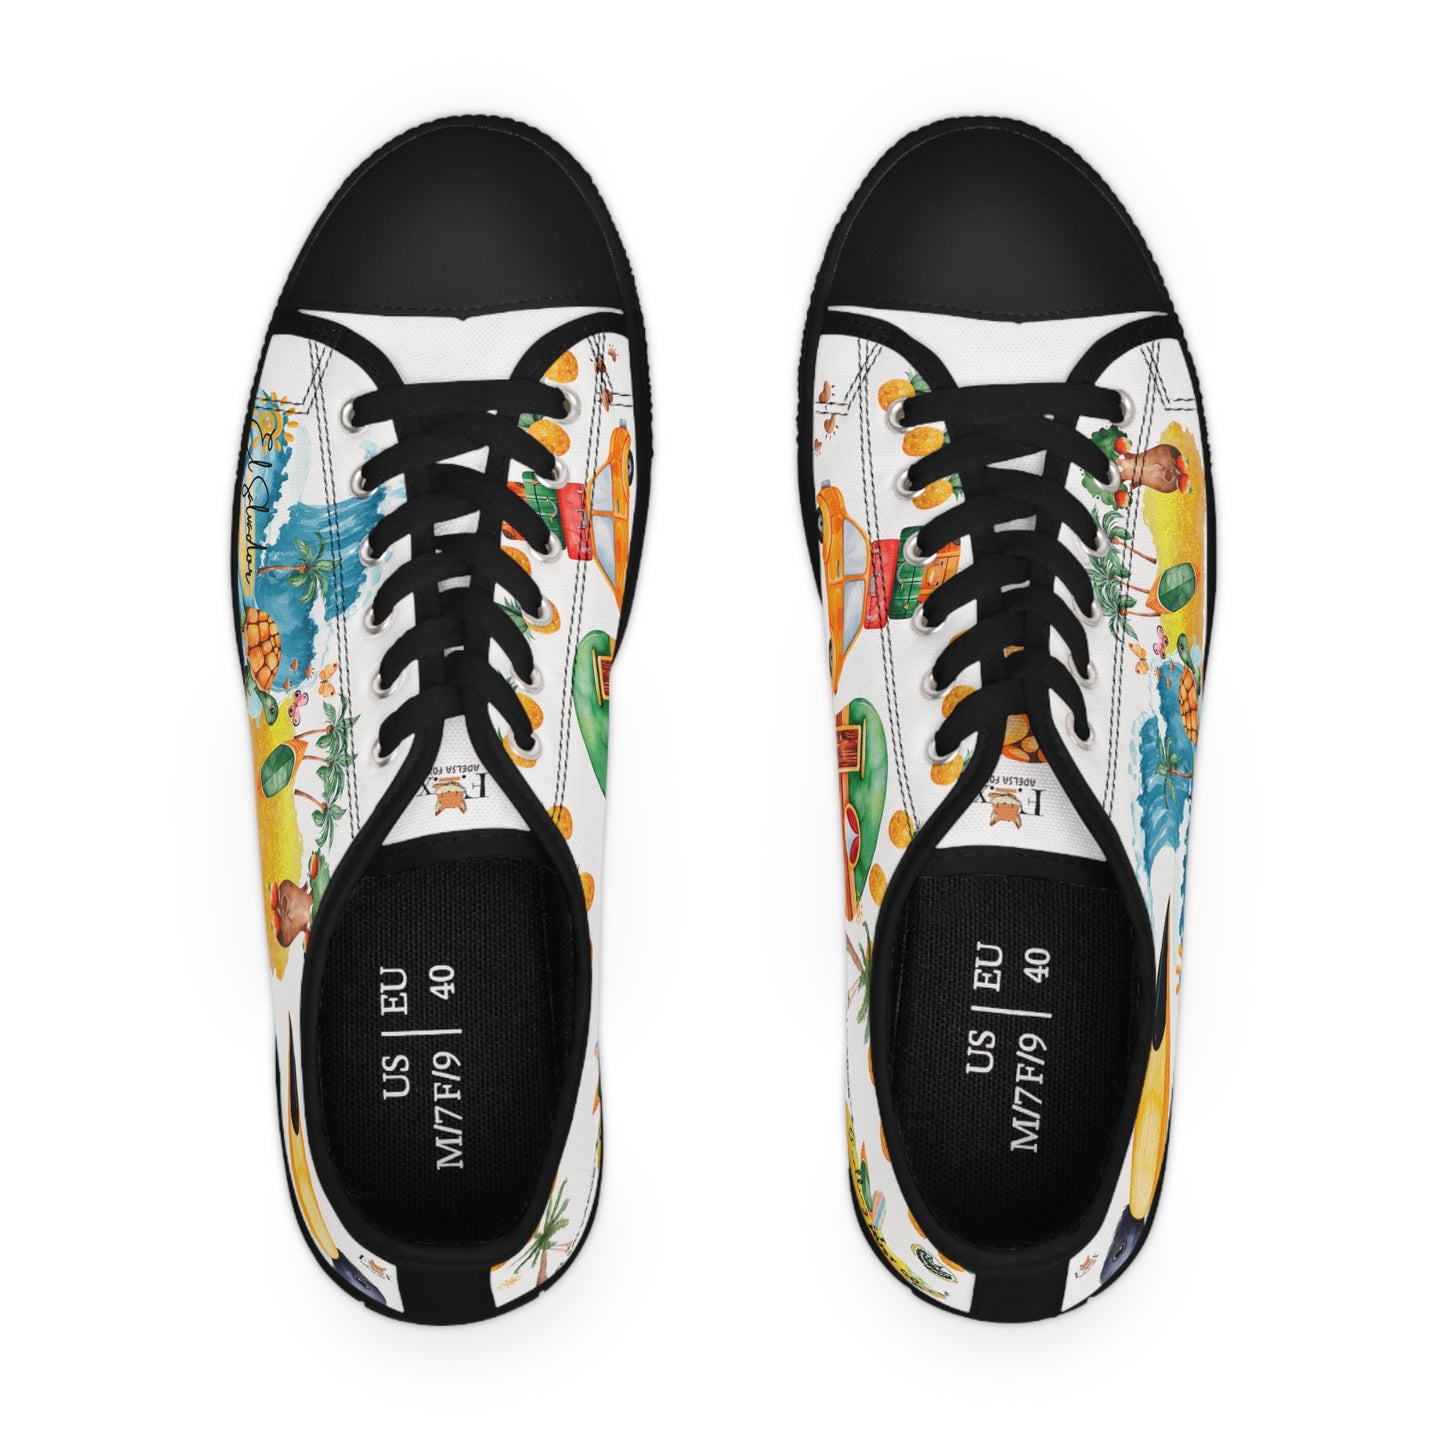 El Salvador is calling & i must Go- Travel Edition - White Background Sneakers